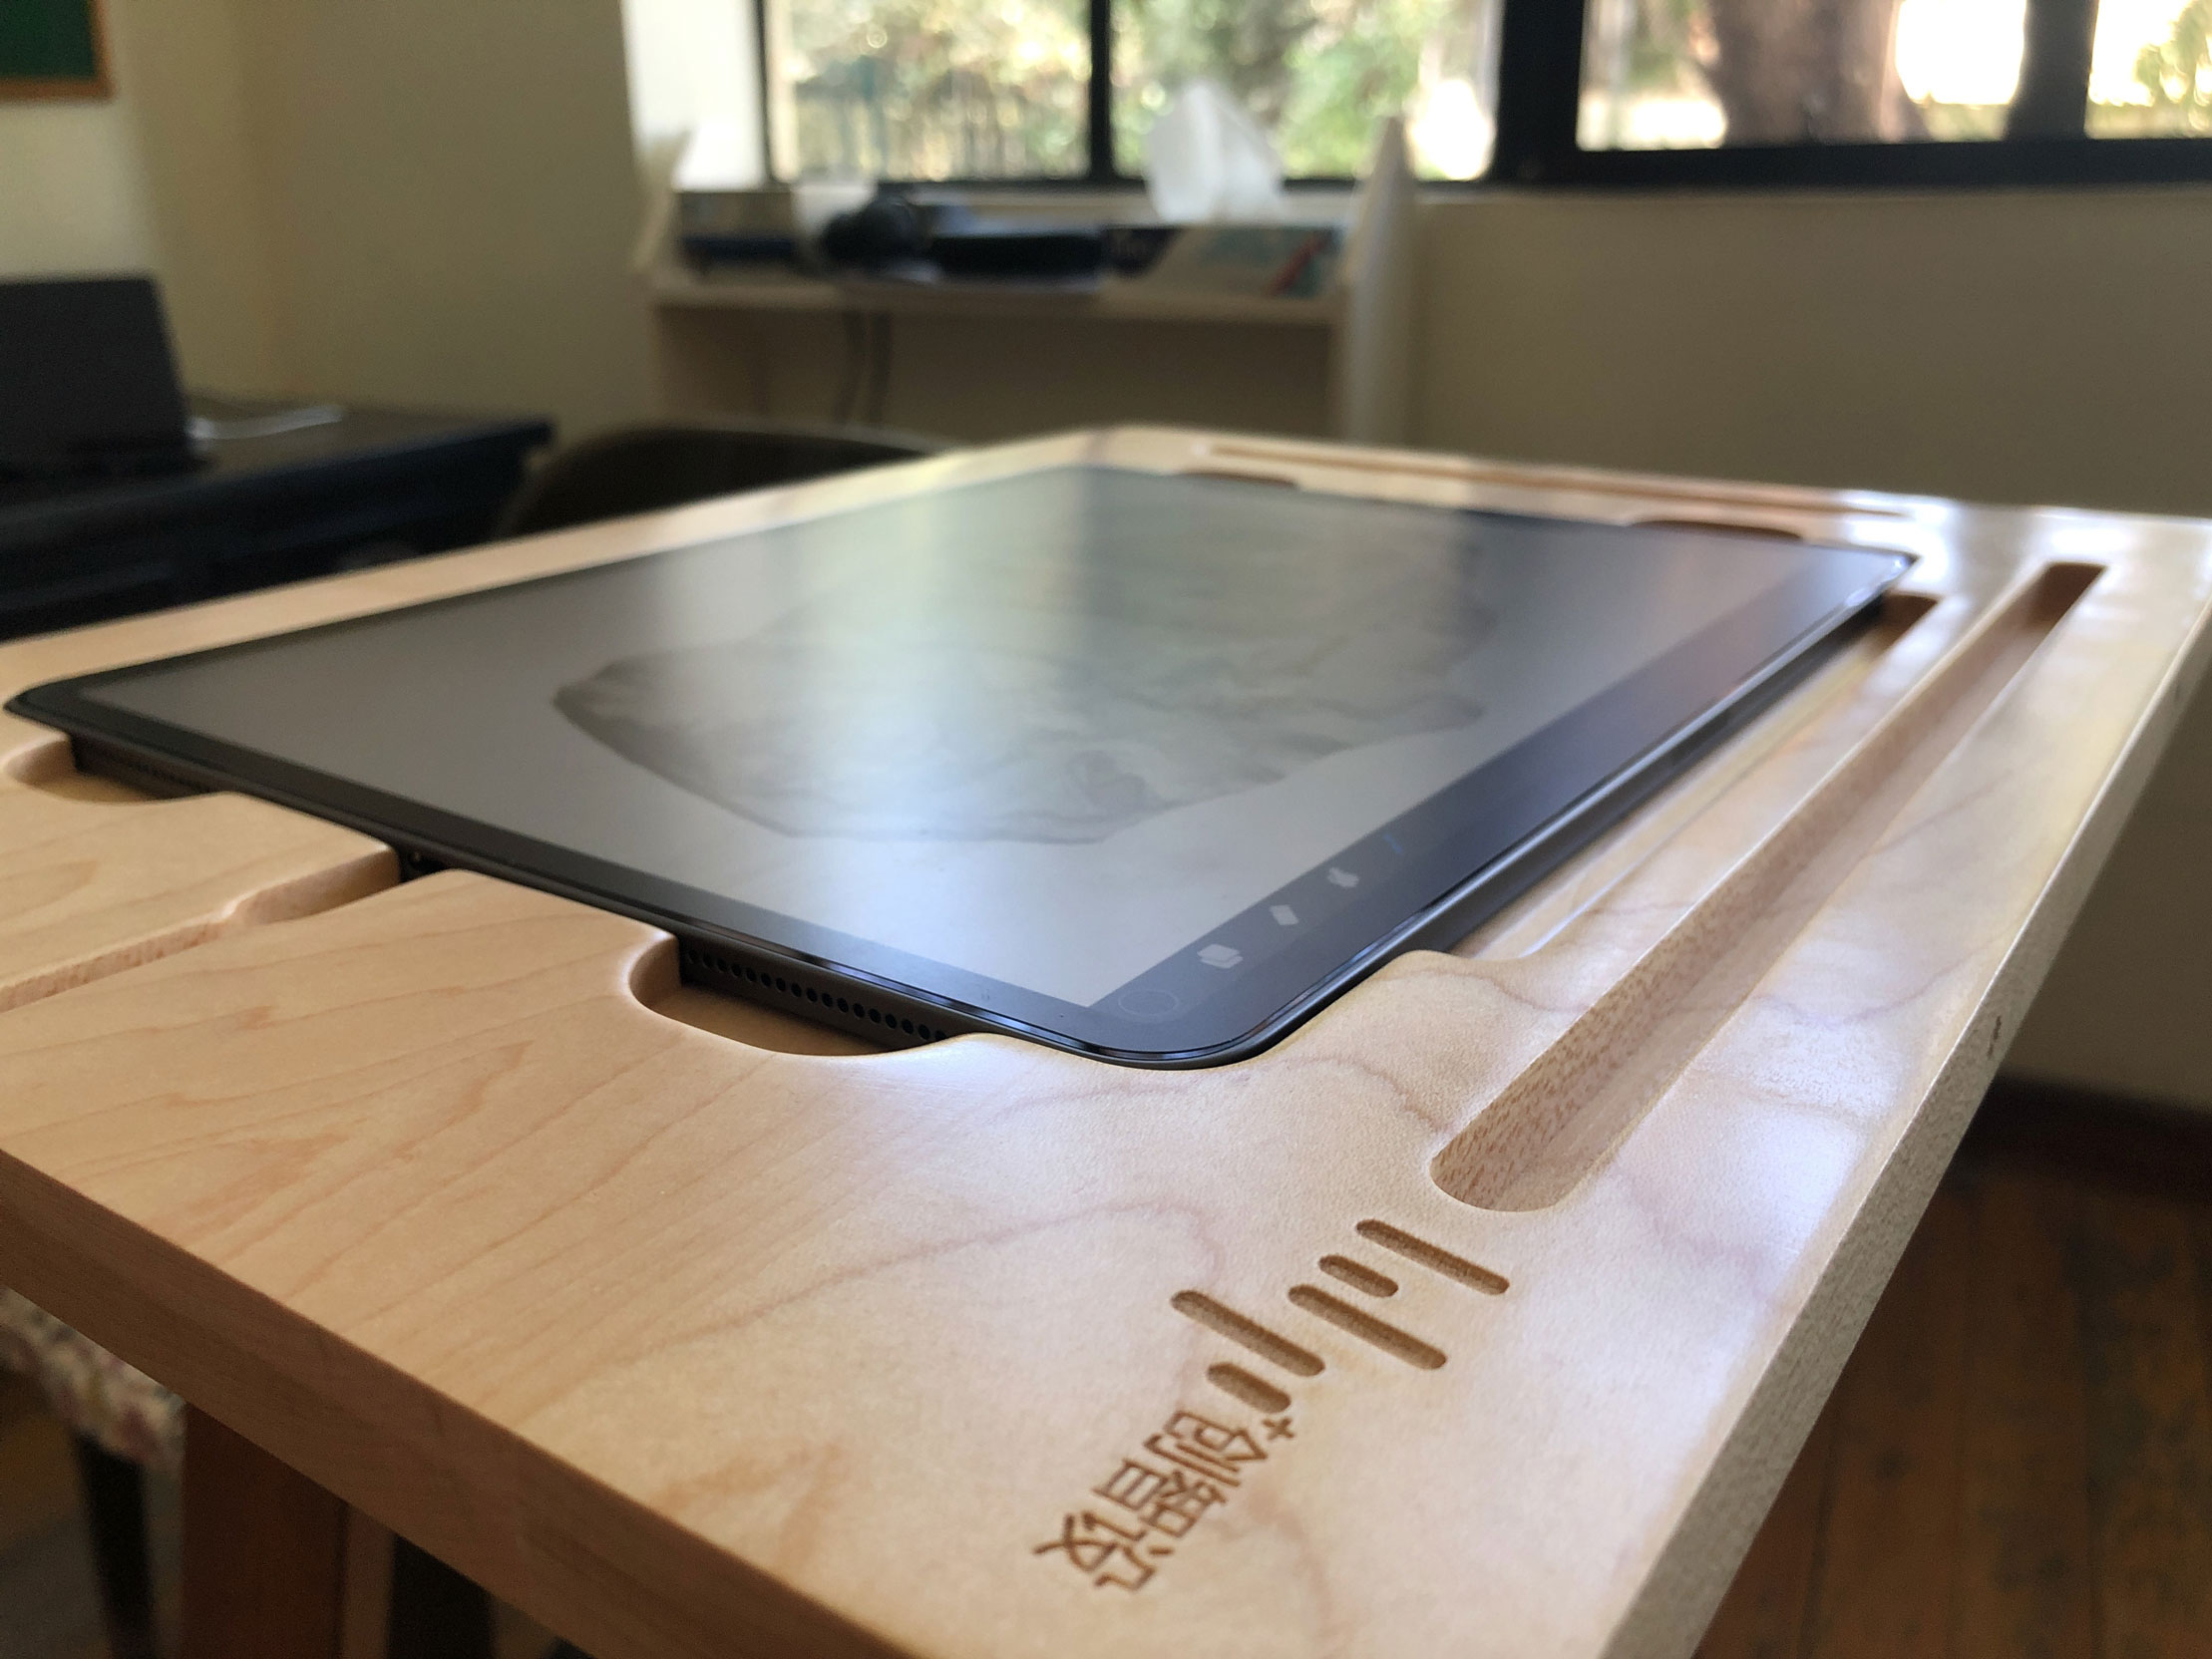 Ale punishment suck Wooden Canvas Smart Board Drawing Desk for the new (2018) iPad Pro 12.9-inch